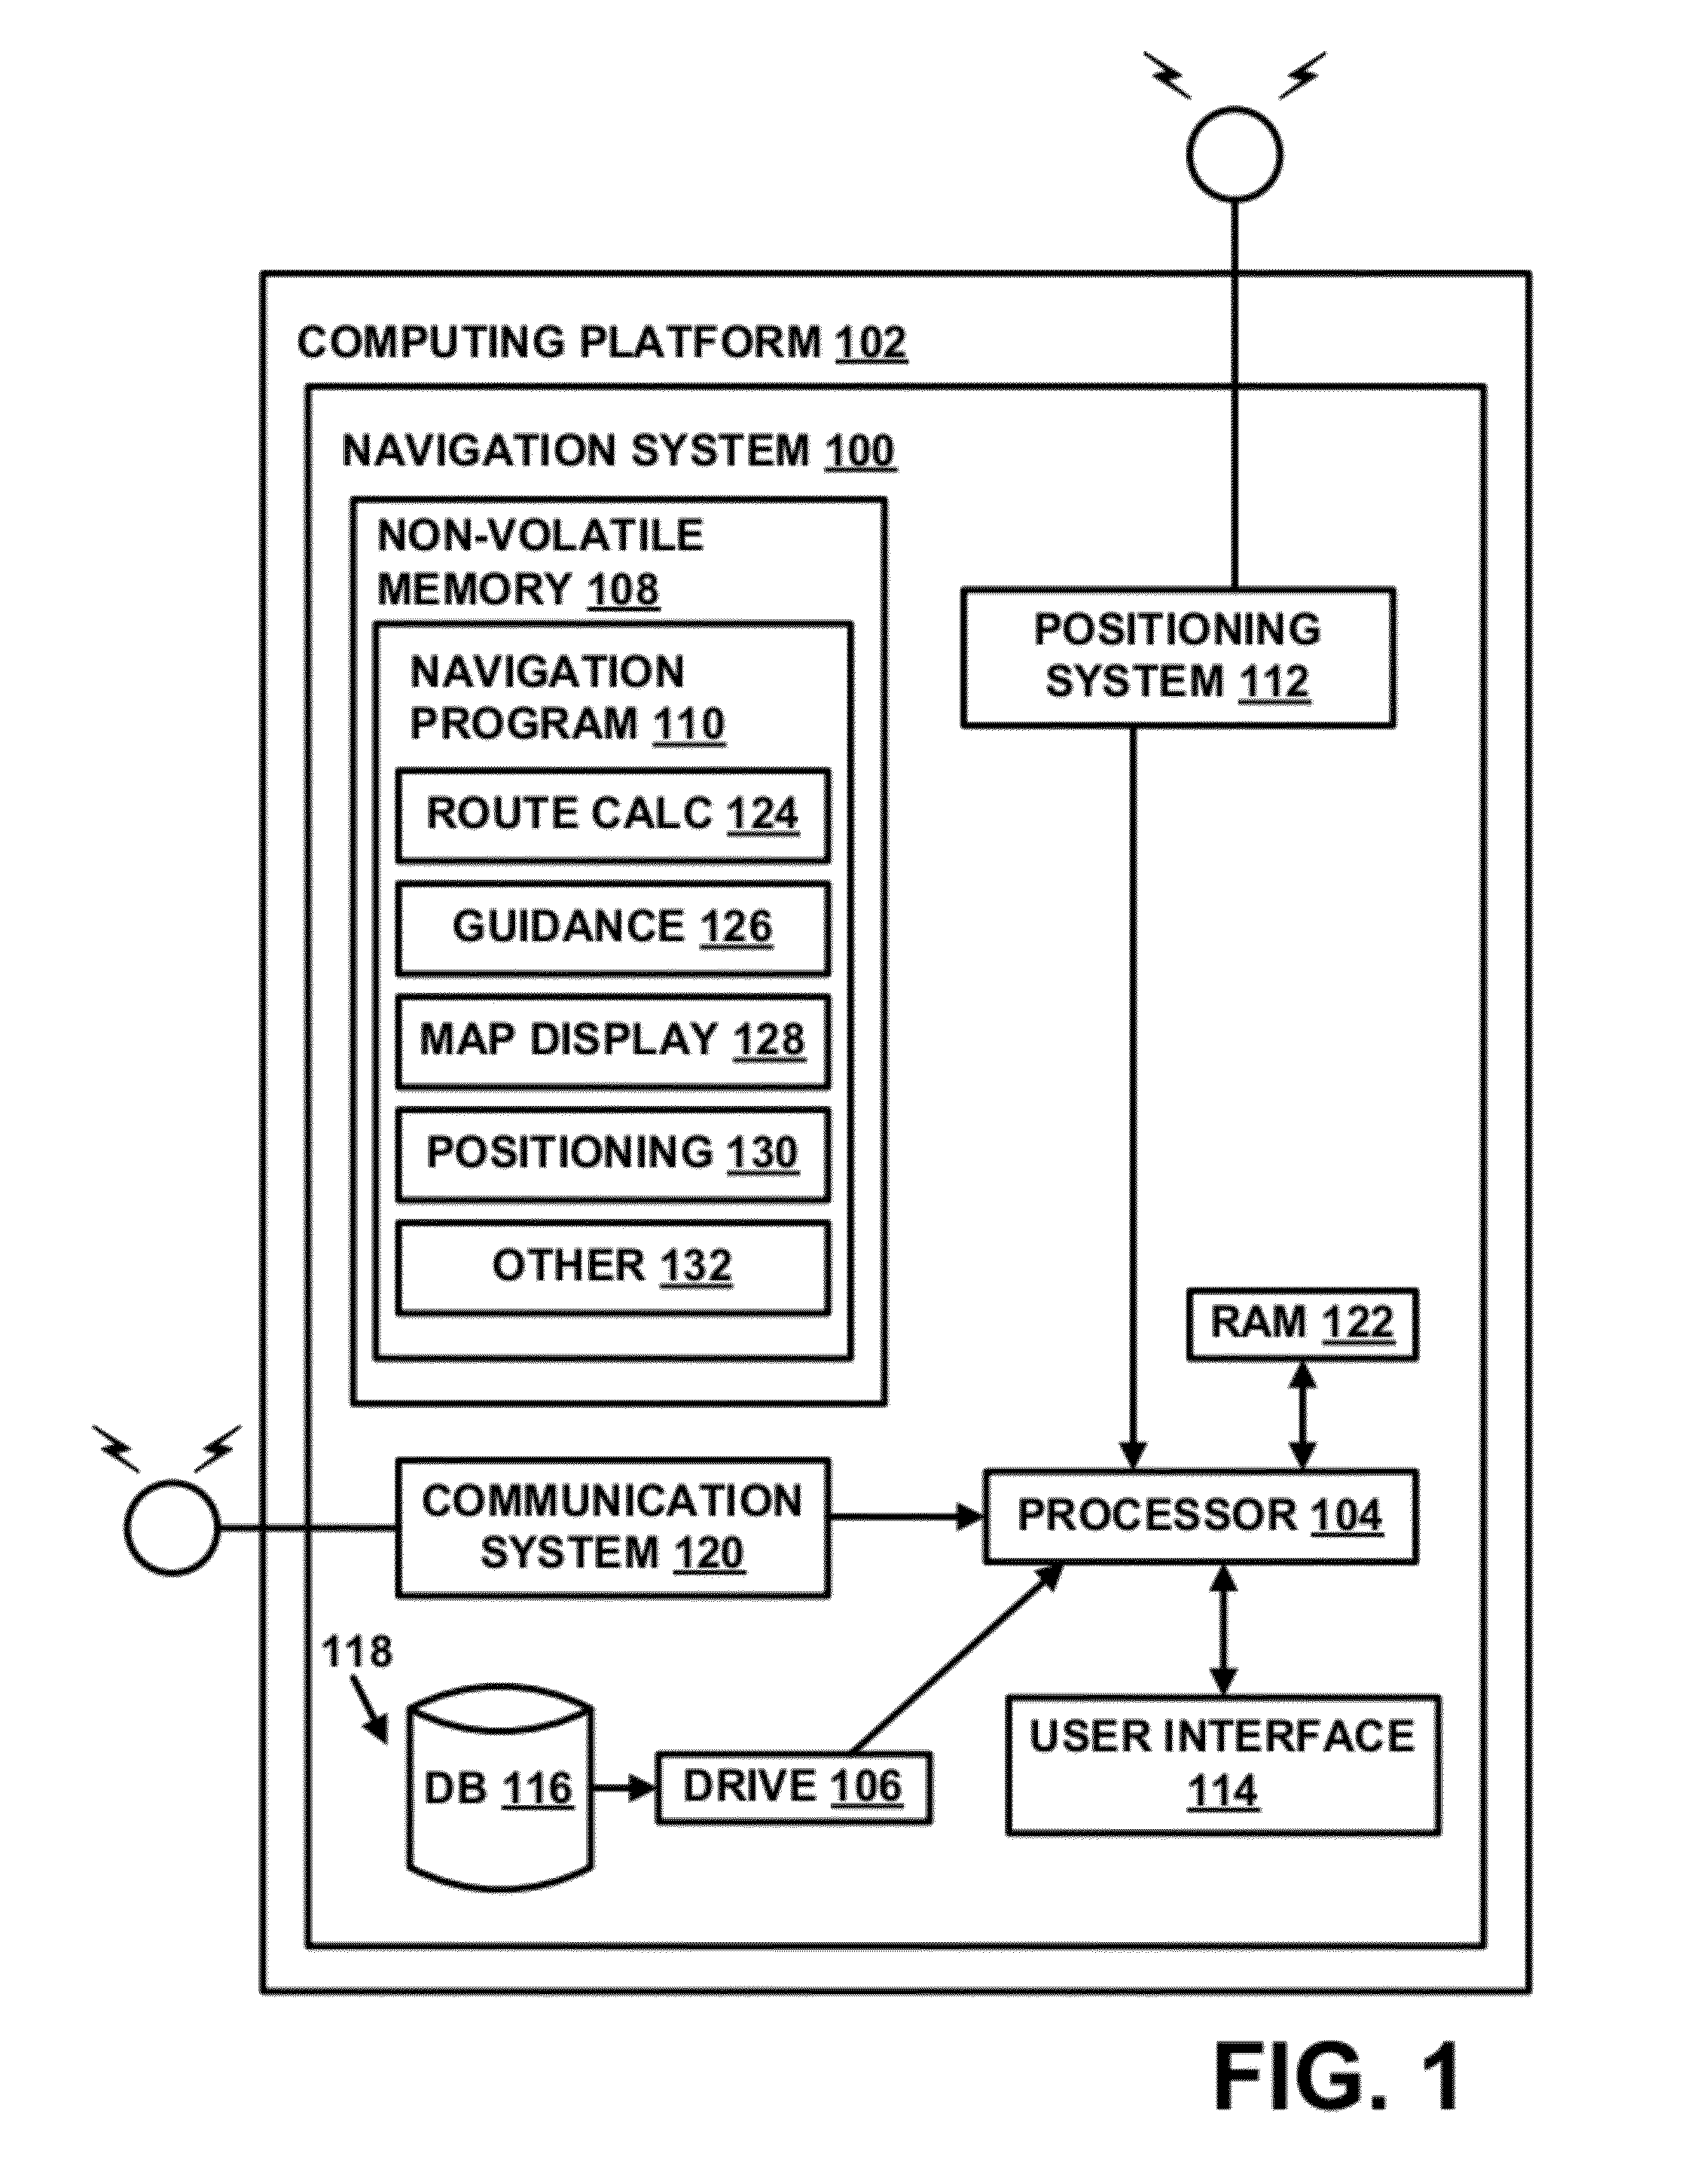 Method of collecting information for a geographic database for use with a navigation system